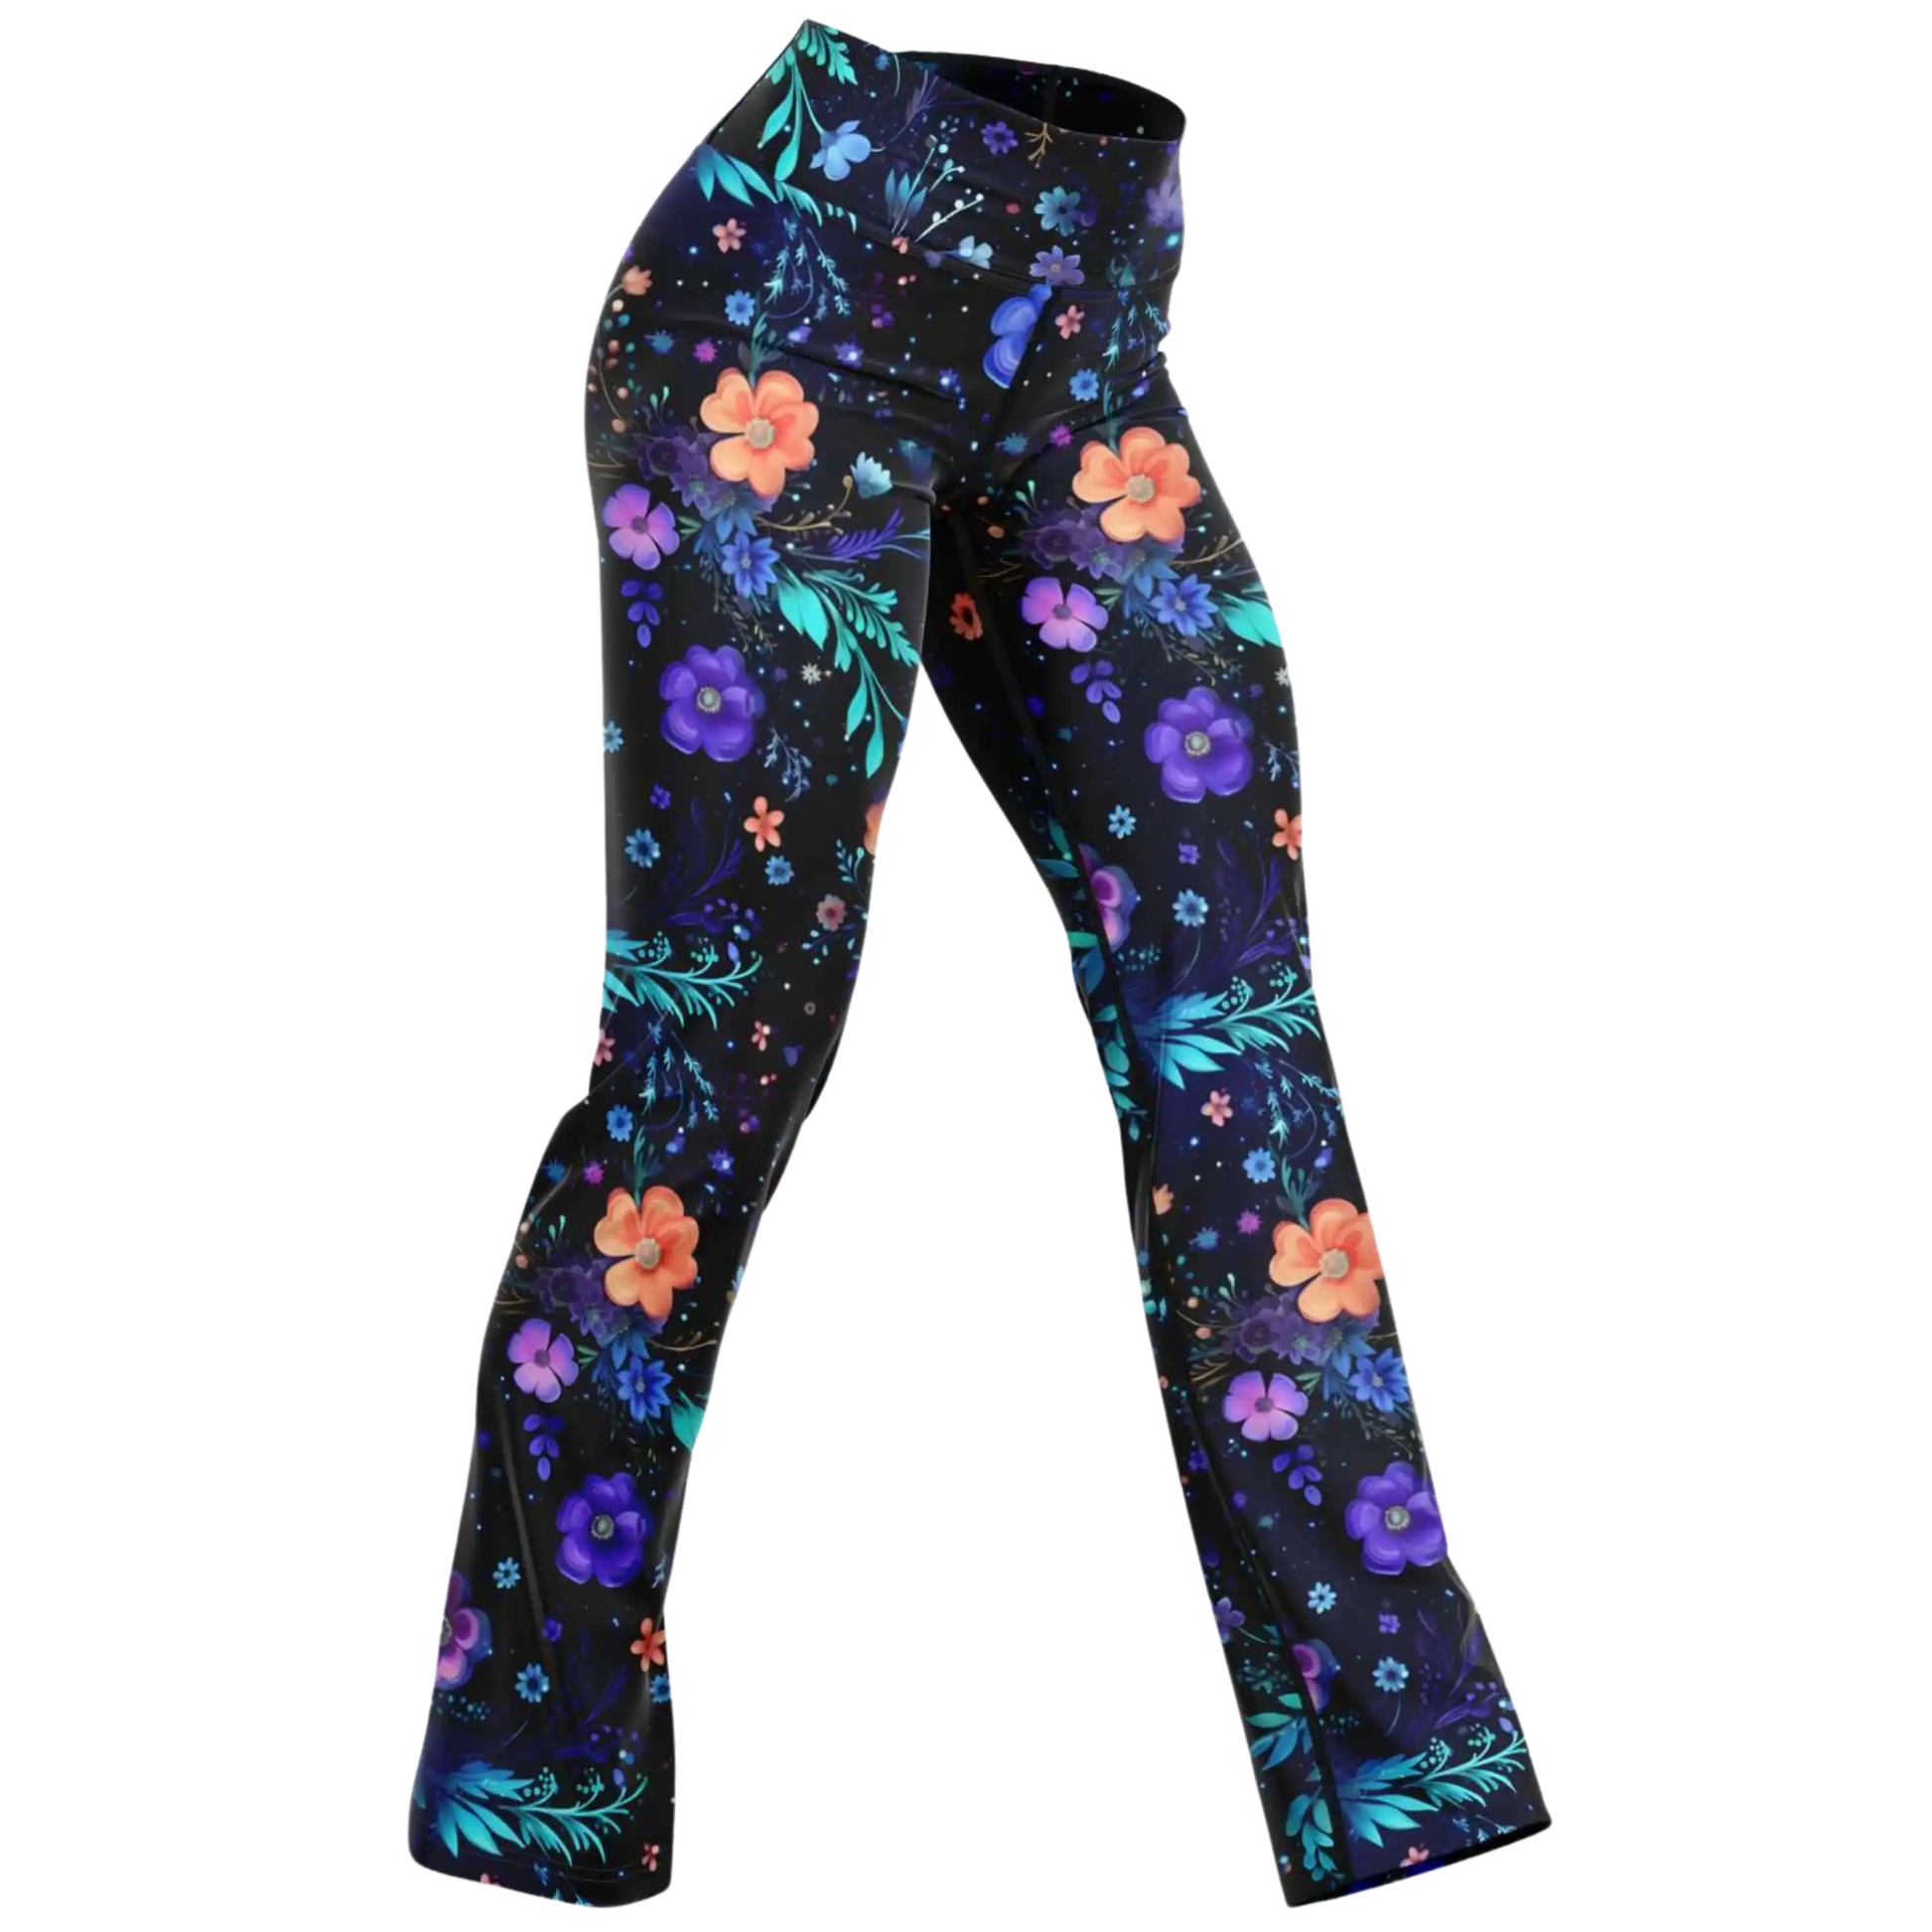 GALACTIC FLORAL PATTERN YOGA FLARE LEGGINGS - XS - Flare